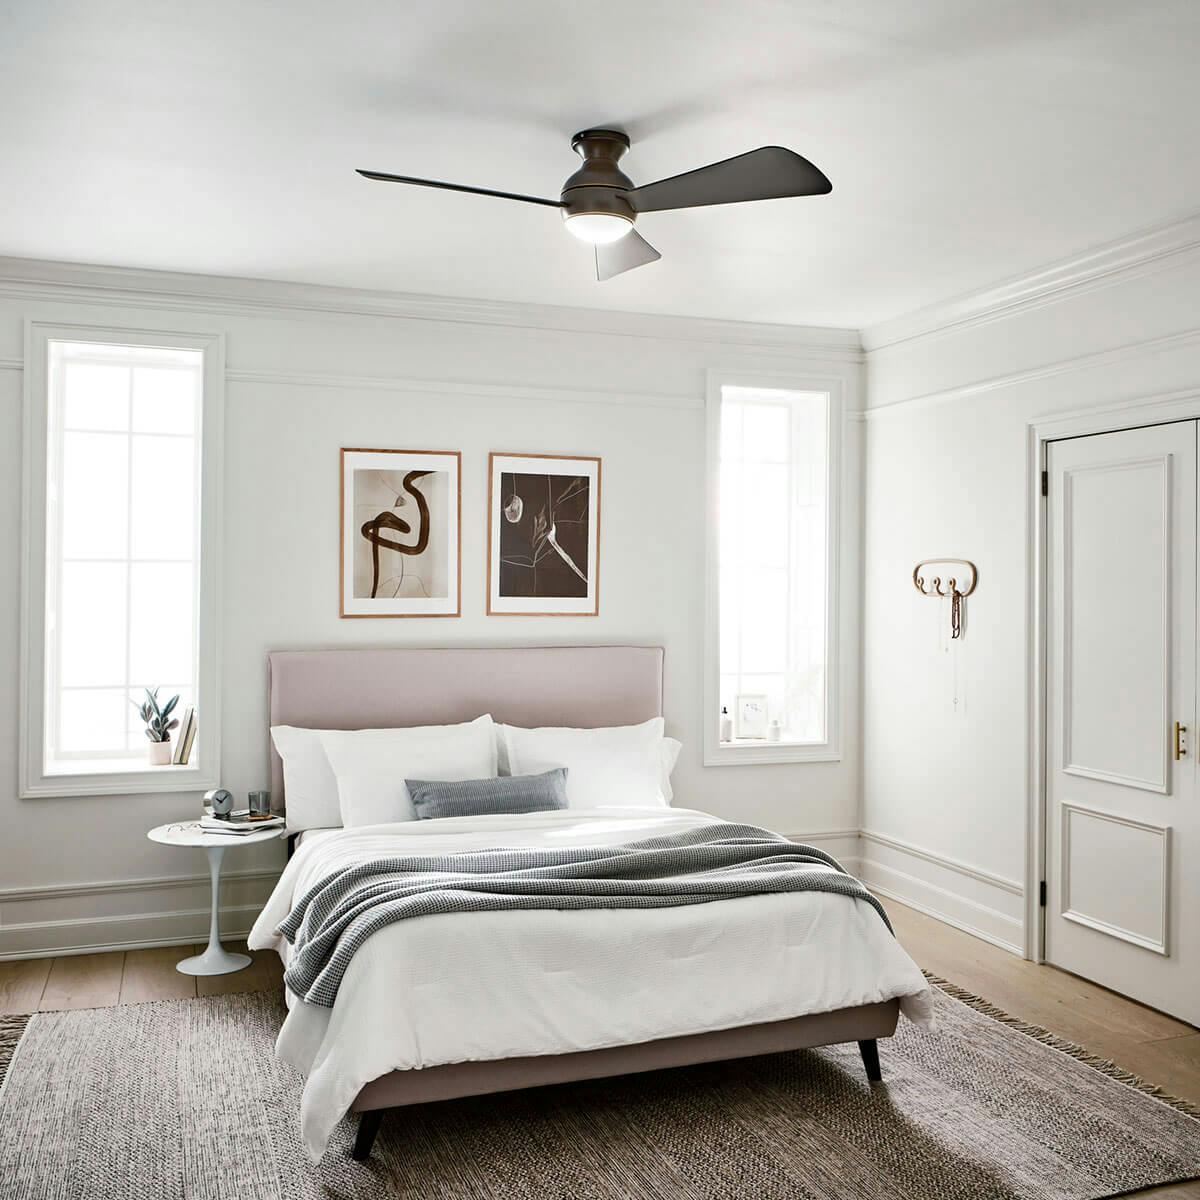 Day timebedroom image featuring Sola 330152OZ